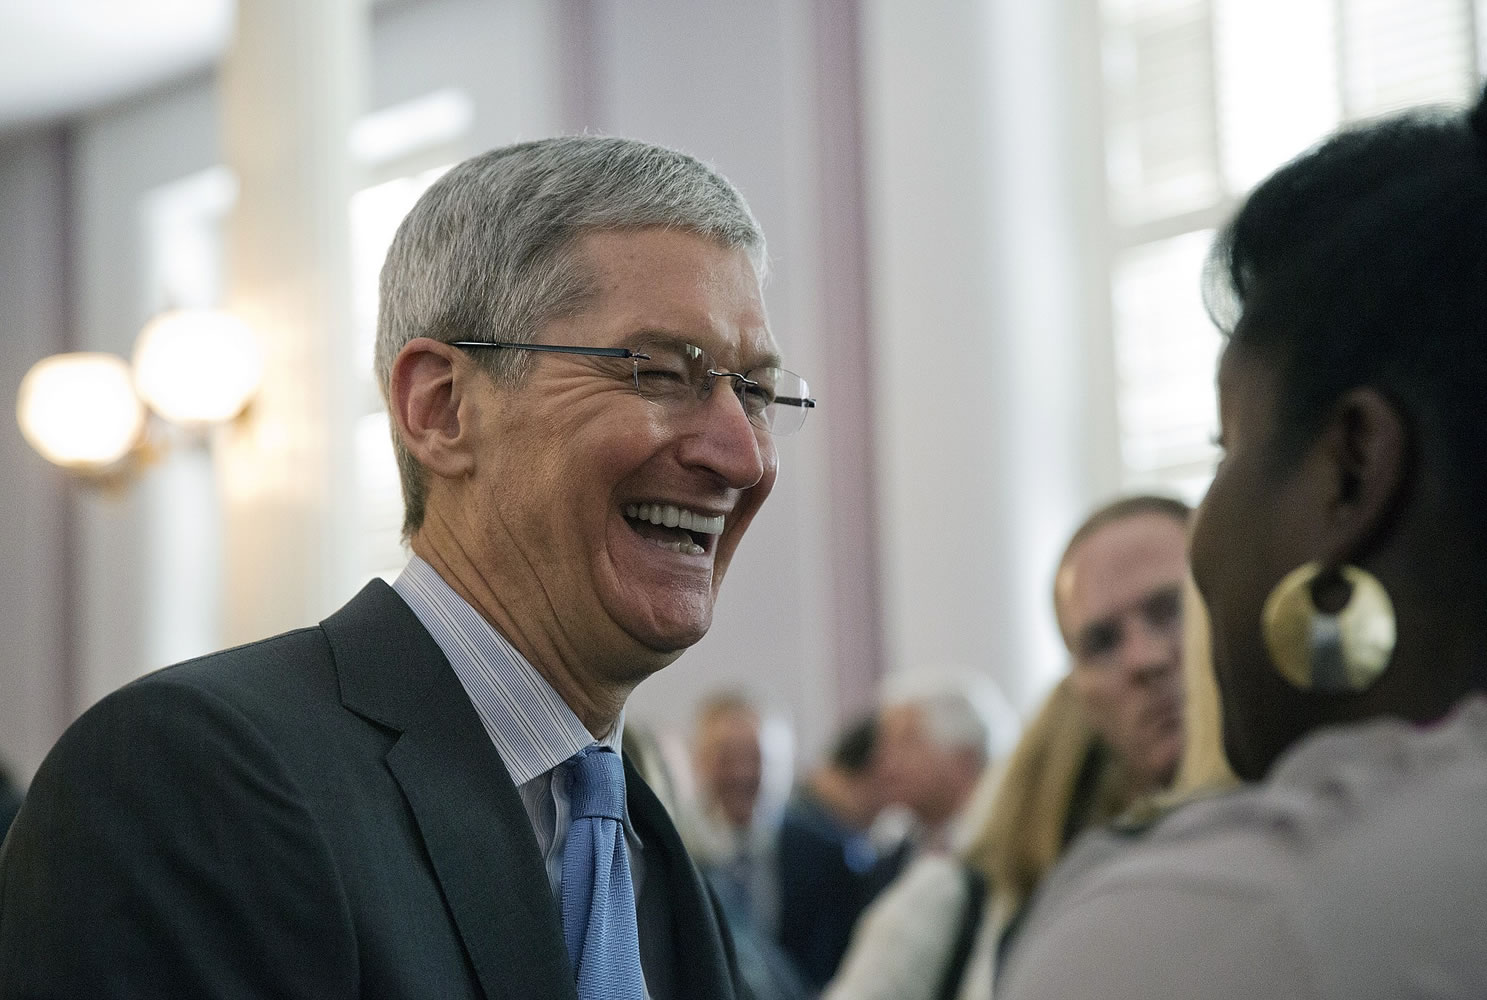 Apple chief executive and Alabama native Tim Cook laughs with a group before an Alabama Academy of Honor ceremony at the state capitol on Oct. 27in Montgomery, Ala.